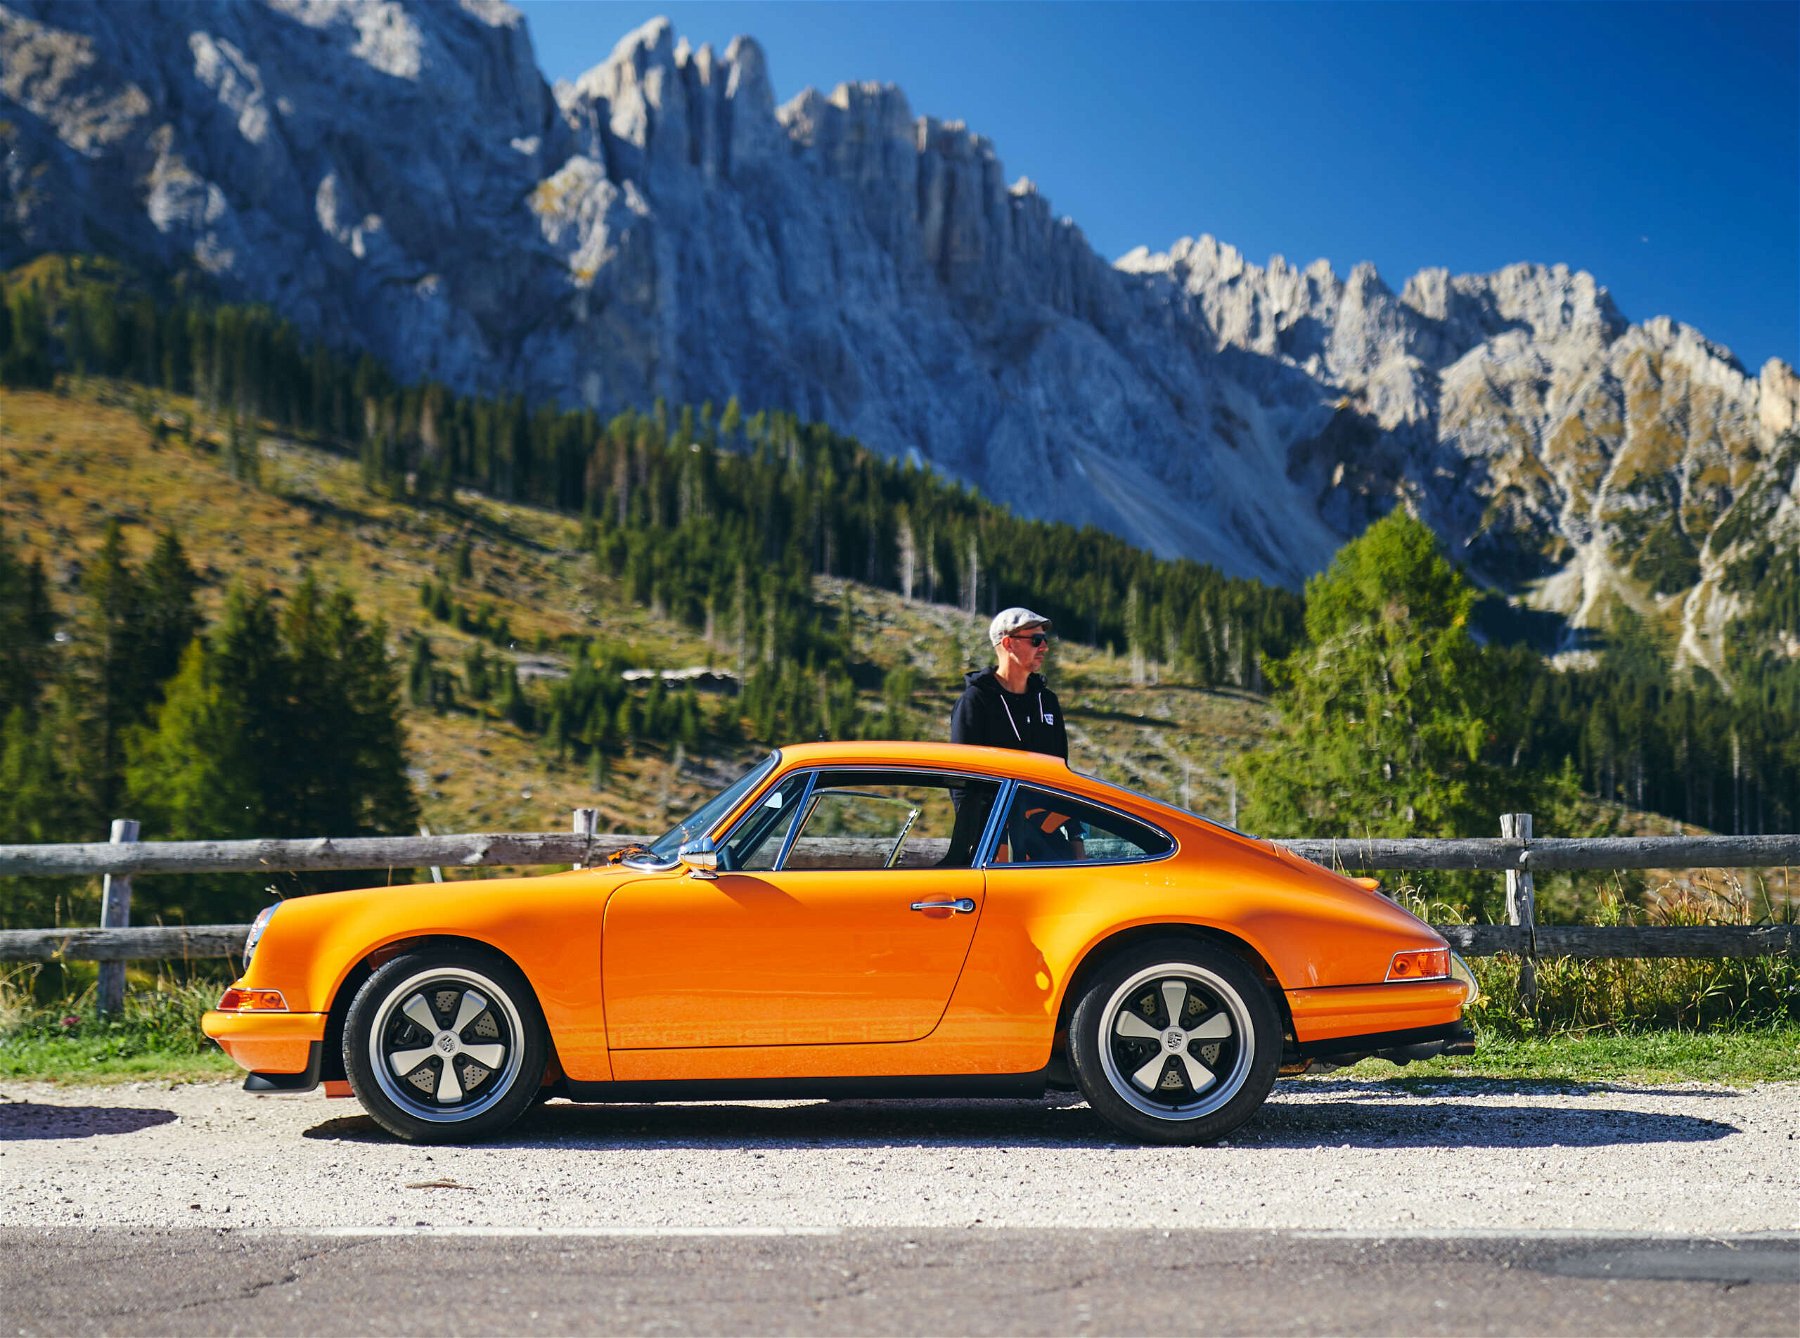 With the Mletzko Porsches in the mountains of South Tyrol